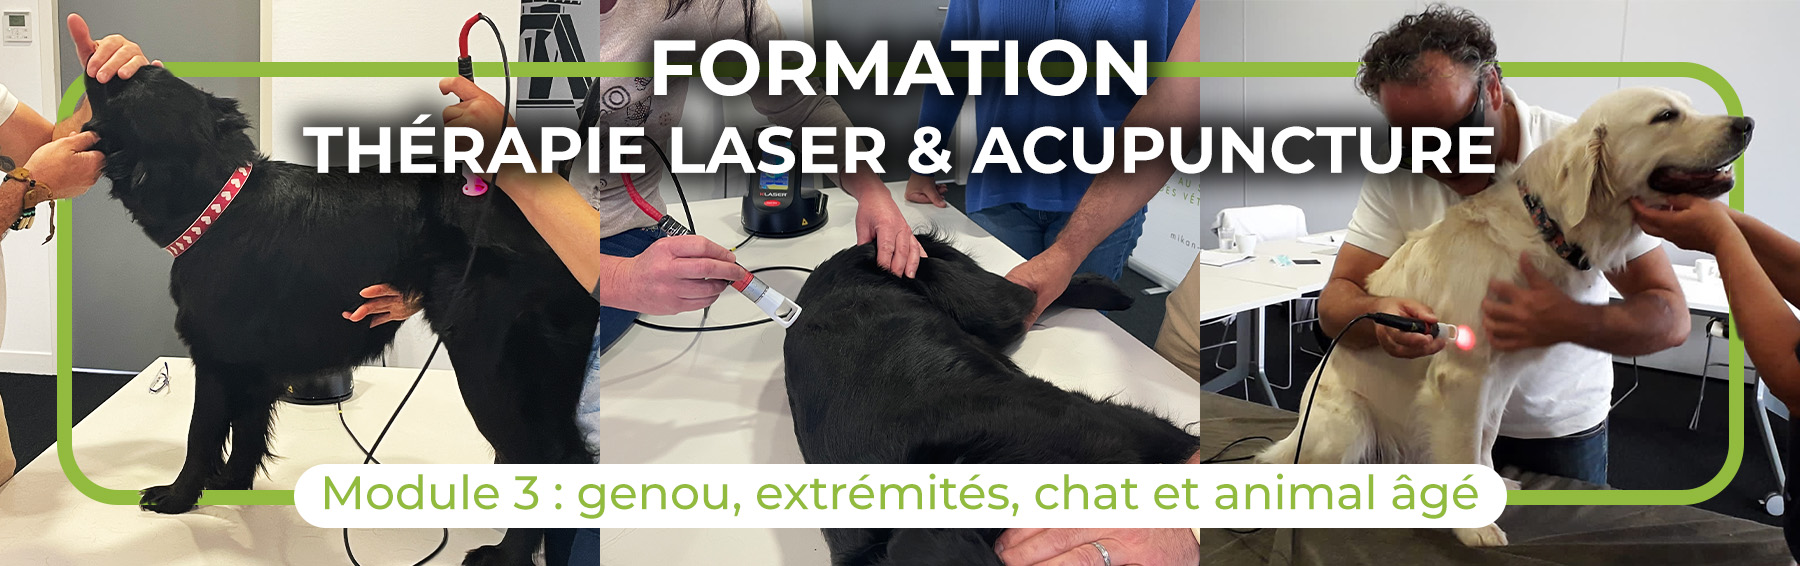 Formation Laser Acupuncture Mikan